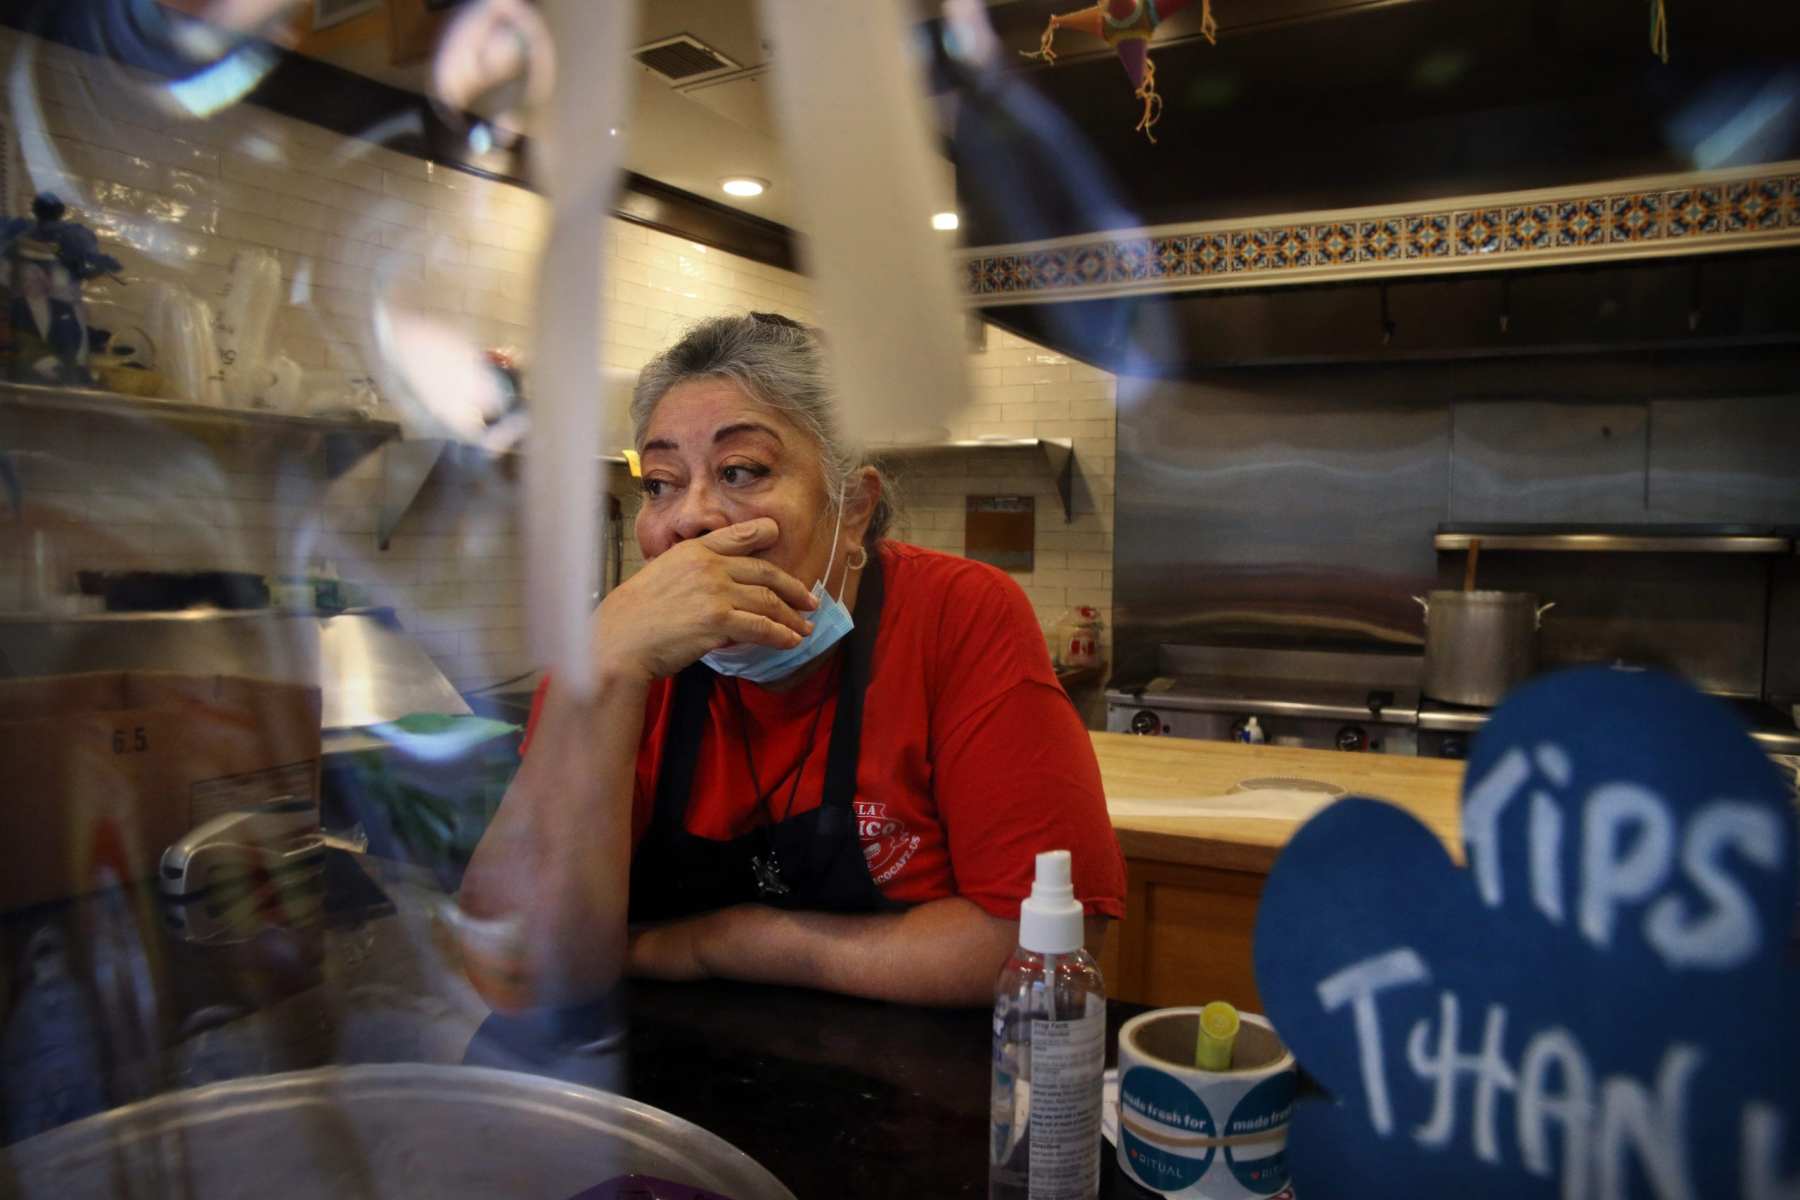 Owner Julie King, in a red shirt covered by an apron, holds back tears at Villa Mexico Cafe on Water Street in Boston, MA. A customer had just walked out while she was on the phone with another customer who was trying to negotiate the price of an order. Having lost two customers in a matter of minutes she said, "I'm going to cry." The pandemic crushed businesses on Boston's Water Street. Even more devastating: The effects ripple around the world.